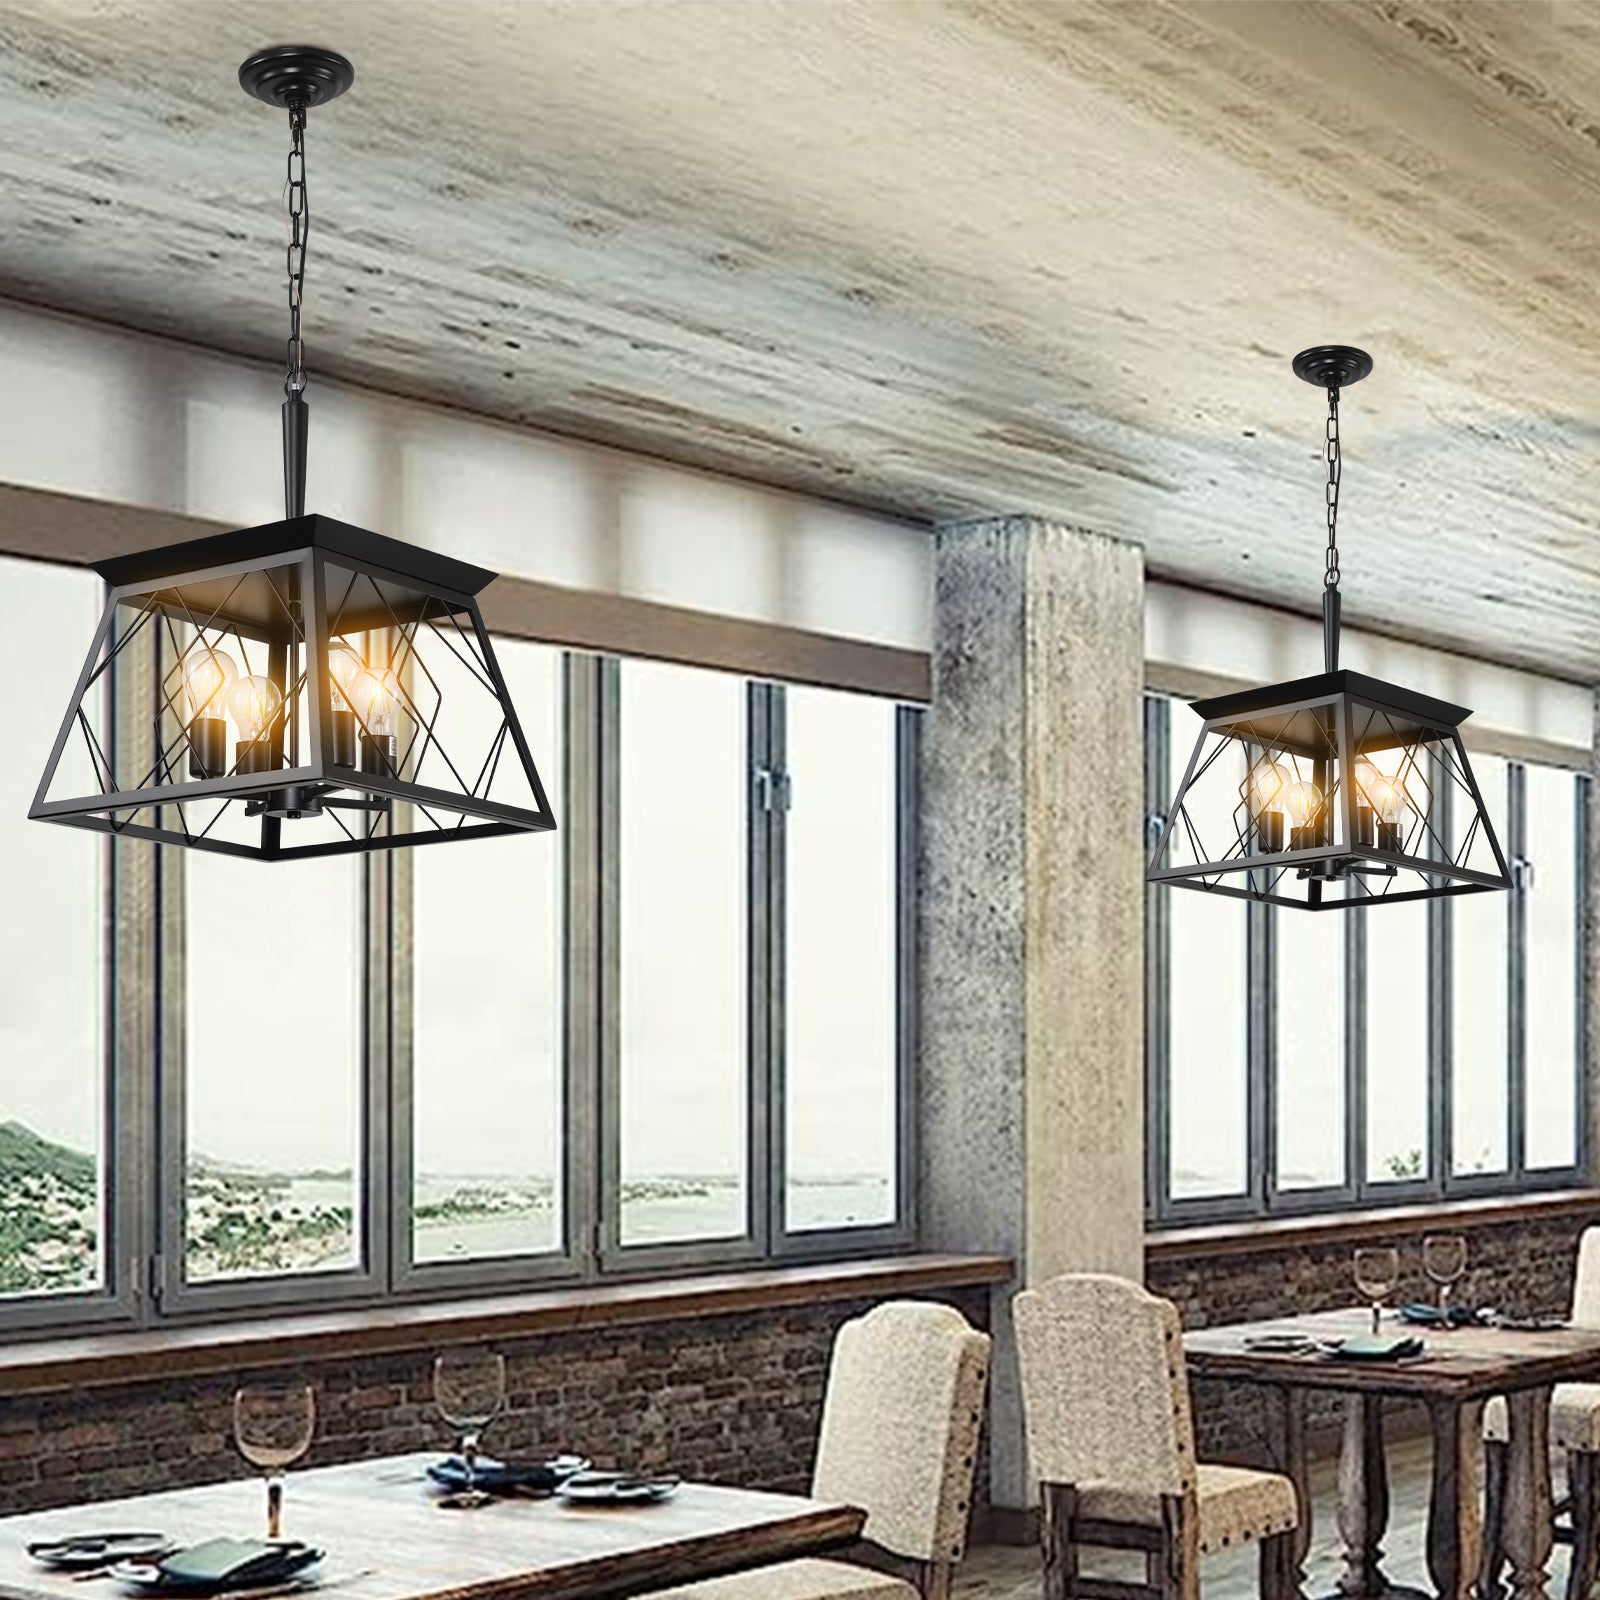 4 Light Farmhouse Chandeliers For Dining Room